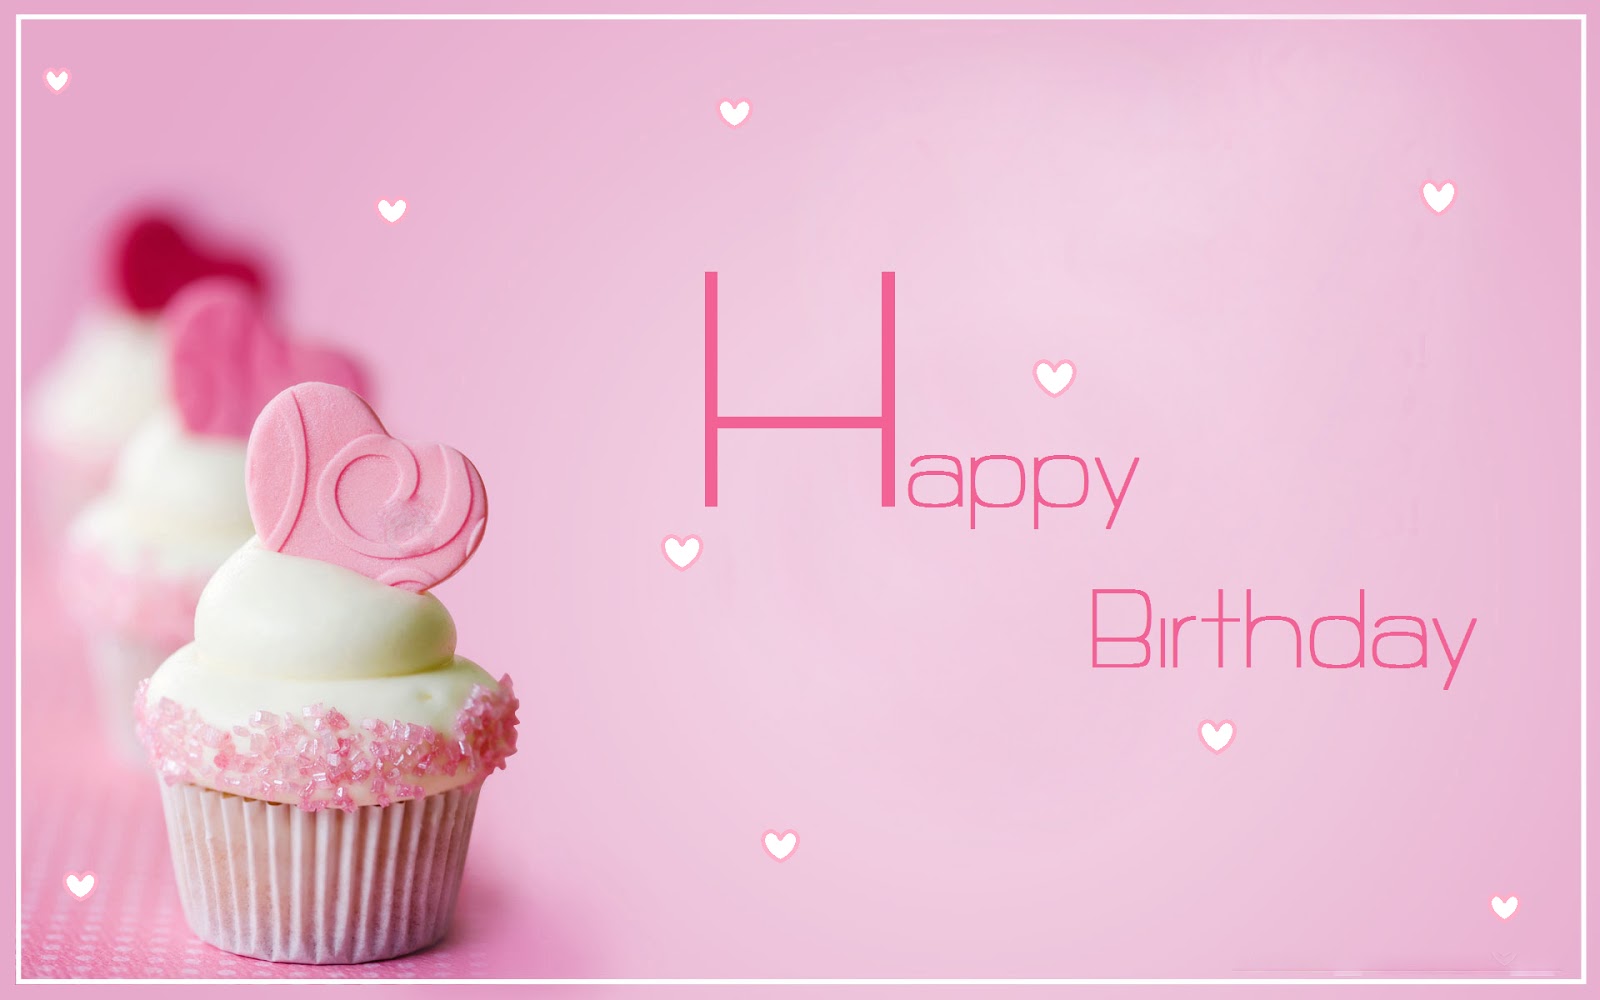 You A Very Happy BirtHDay Words Texted Wishes Card Image Pixhome